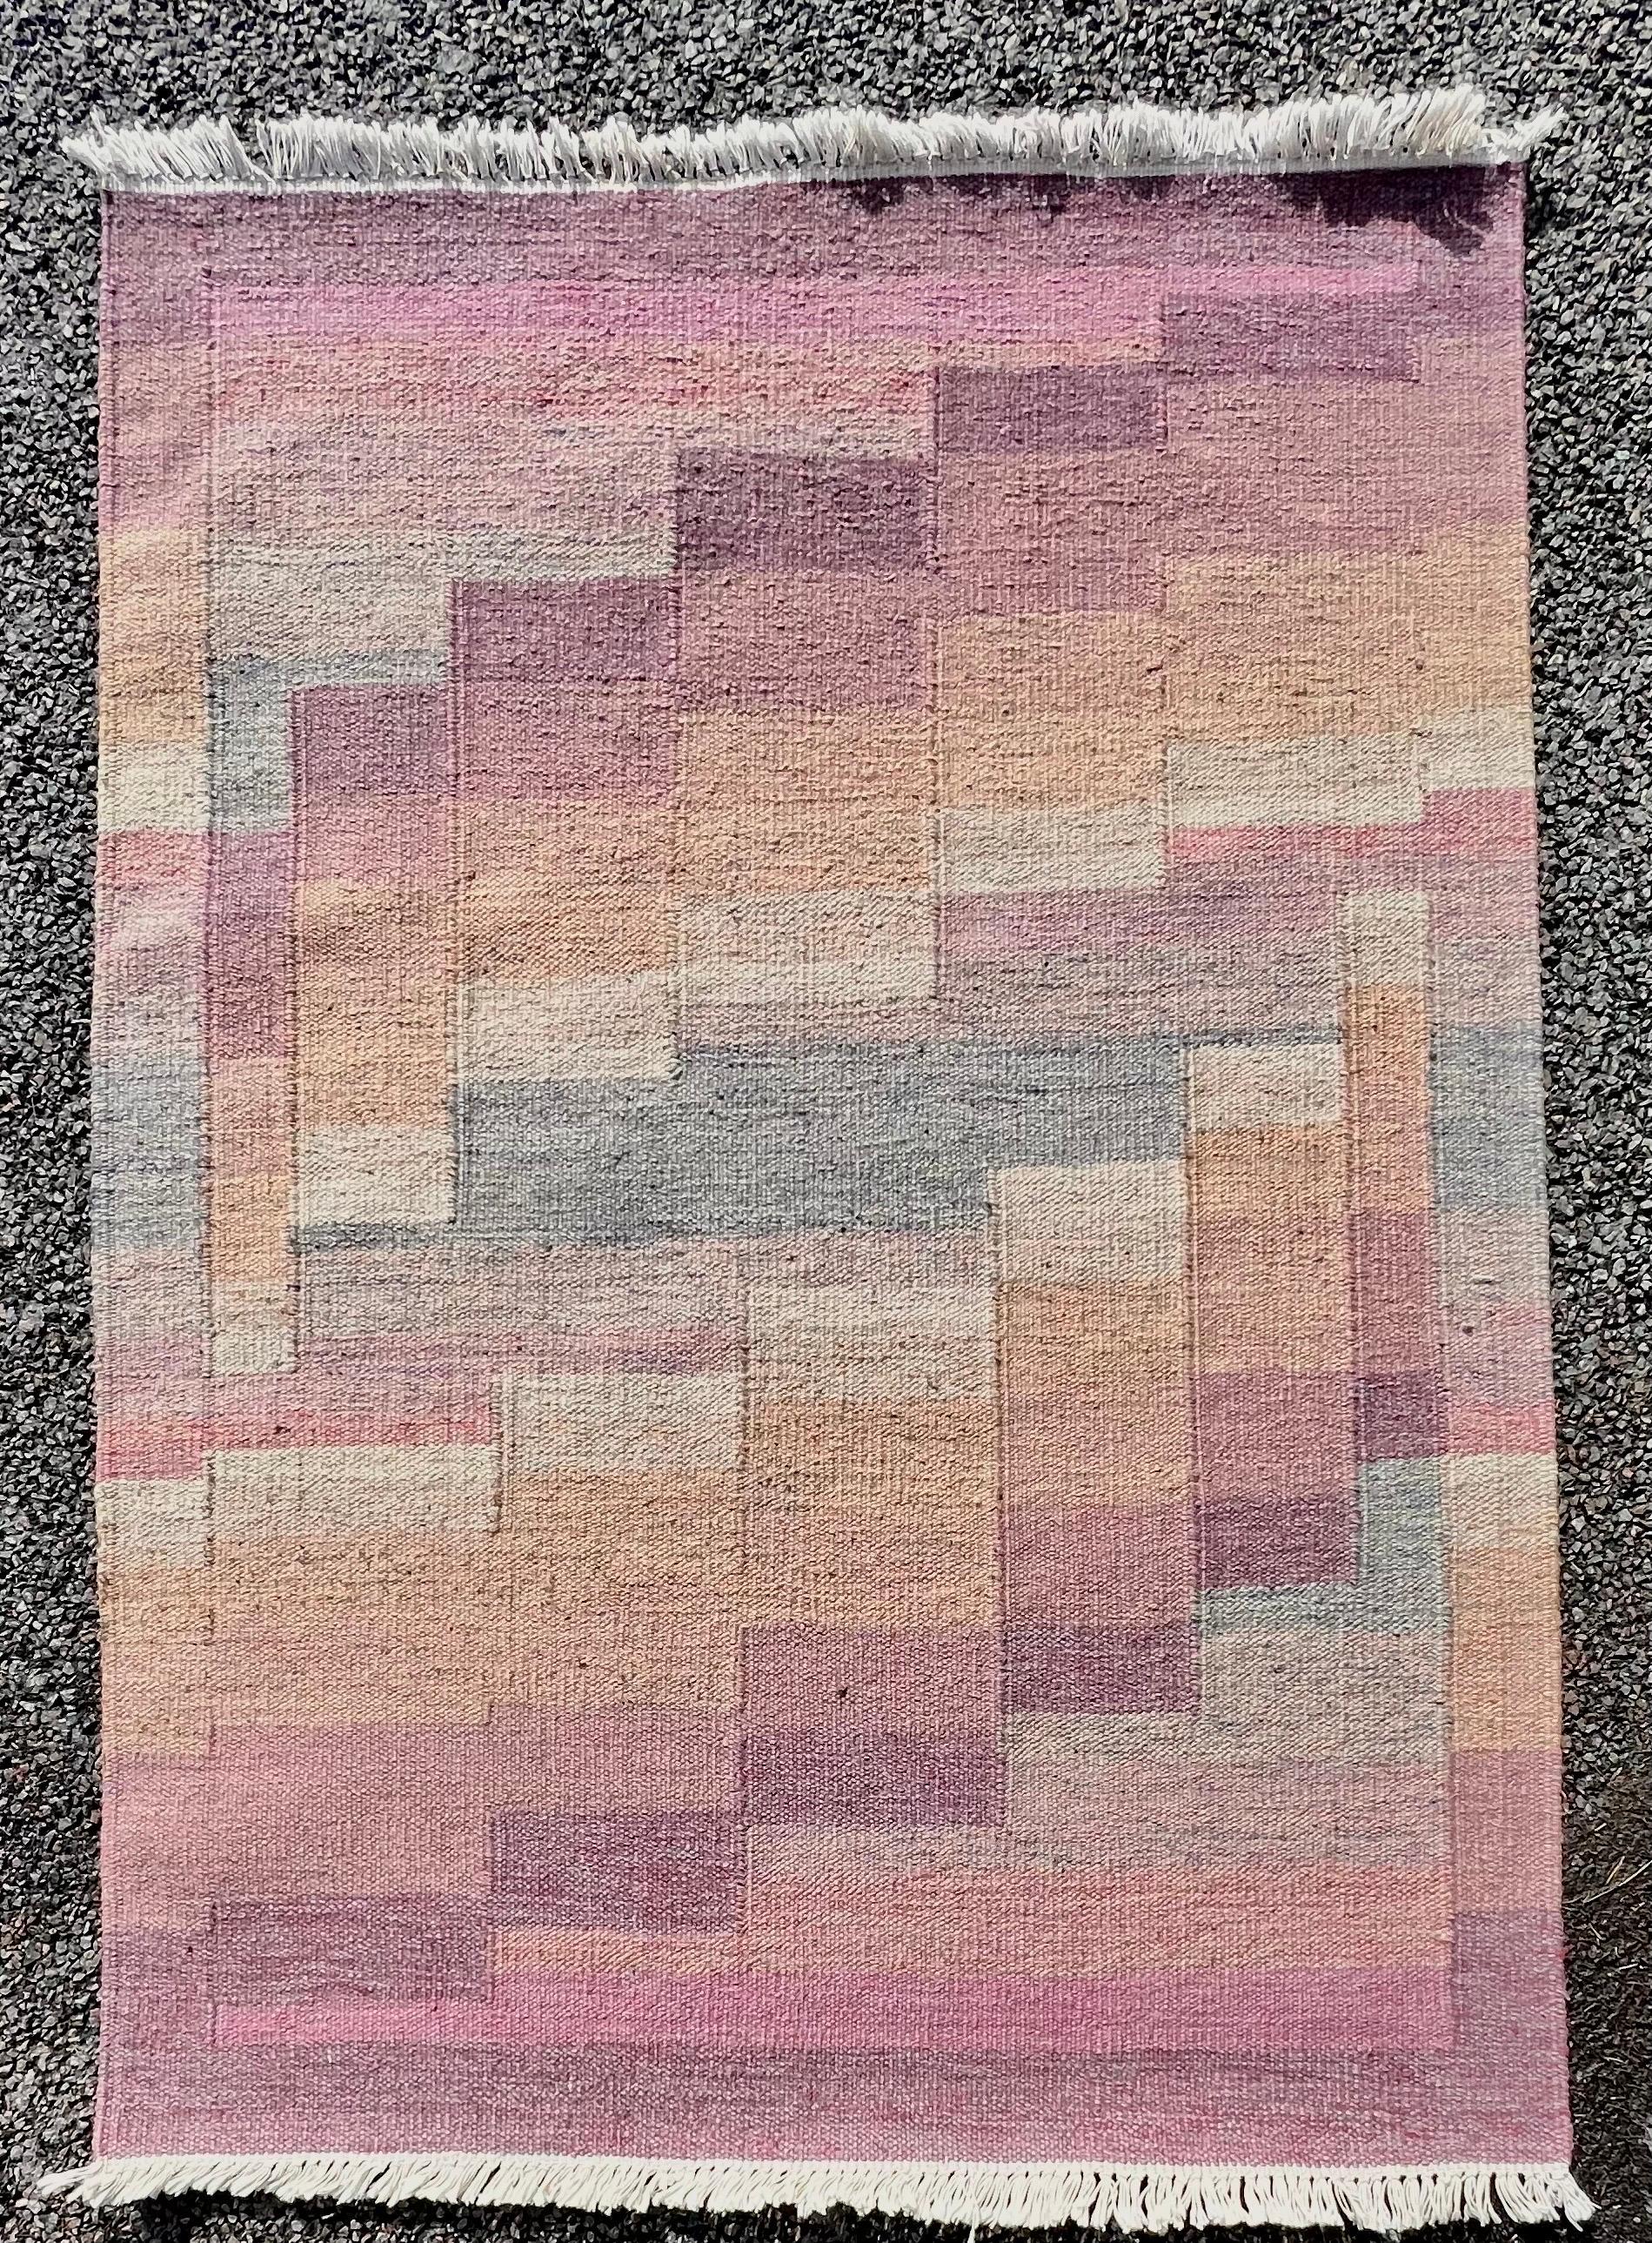 Scandinavian Modern Swedish Pink and Grey Rug, Handcrafted, 1950s For Sale